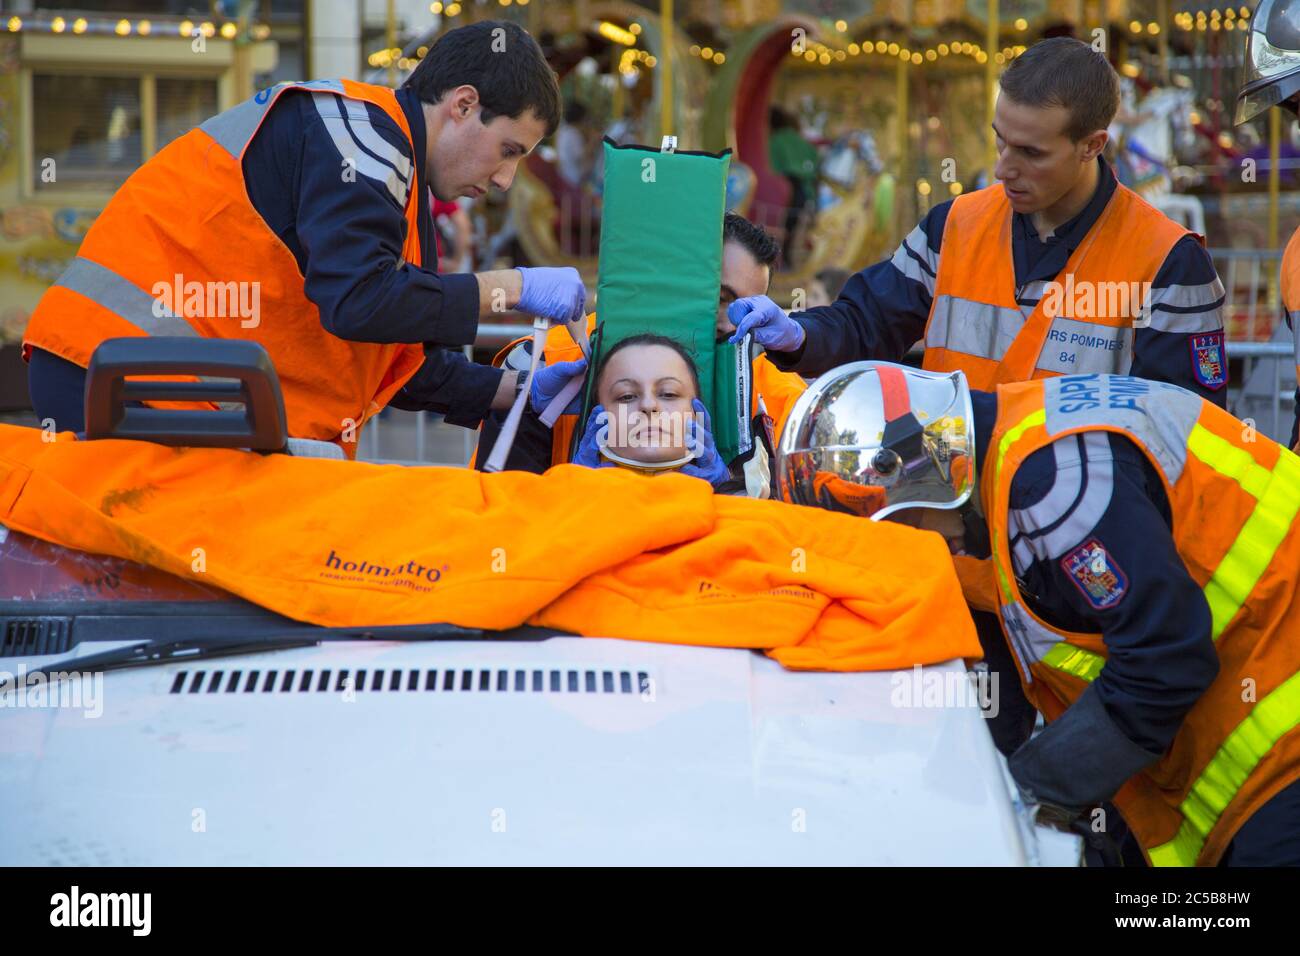 AVIGNON, FRANCE - OCTOBER 15: Local authority personnel demonstrate rescue operation activity at local fair in Avignon, France on October 15, 2013 Stock Photo